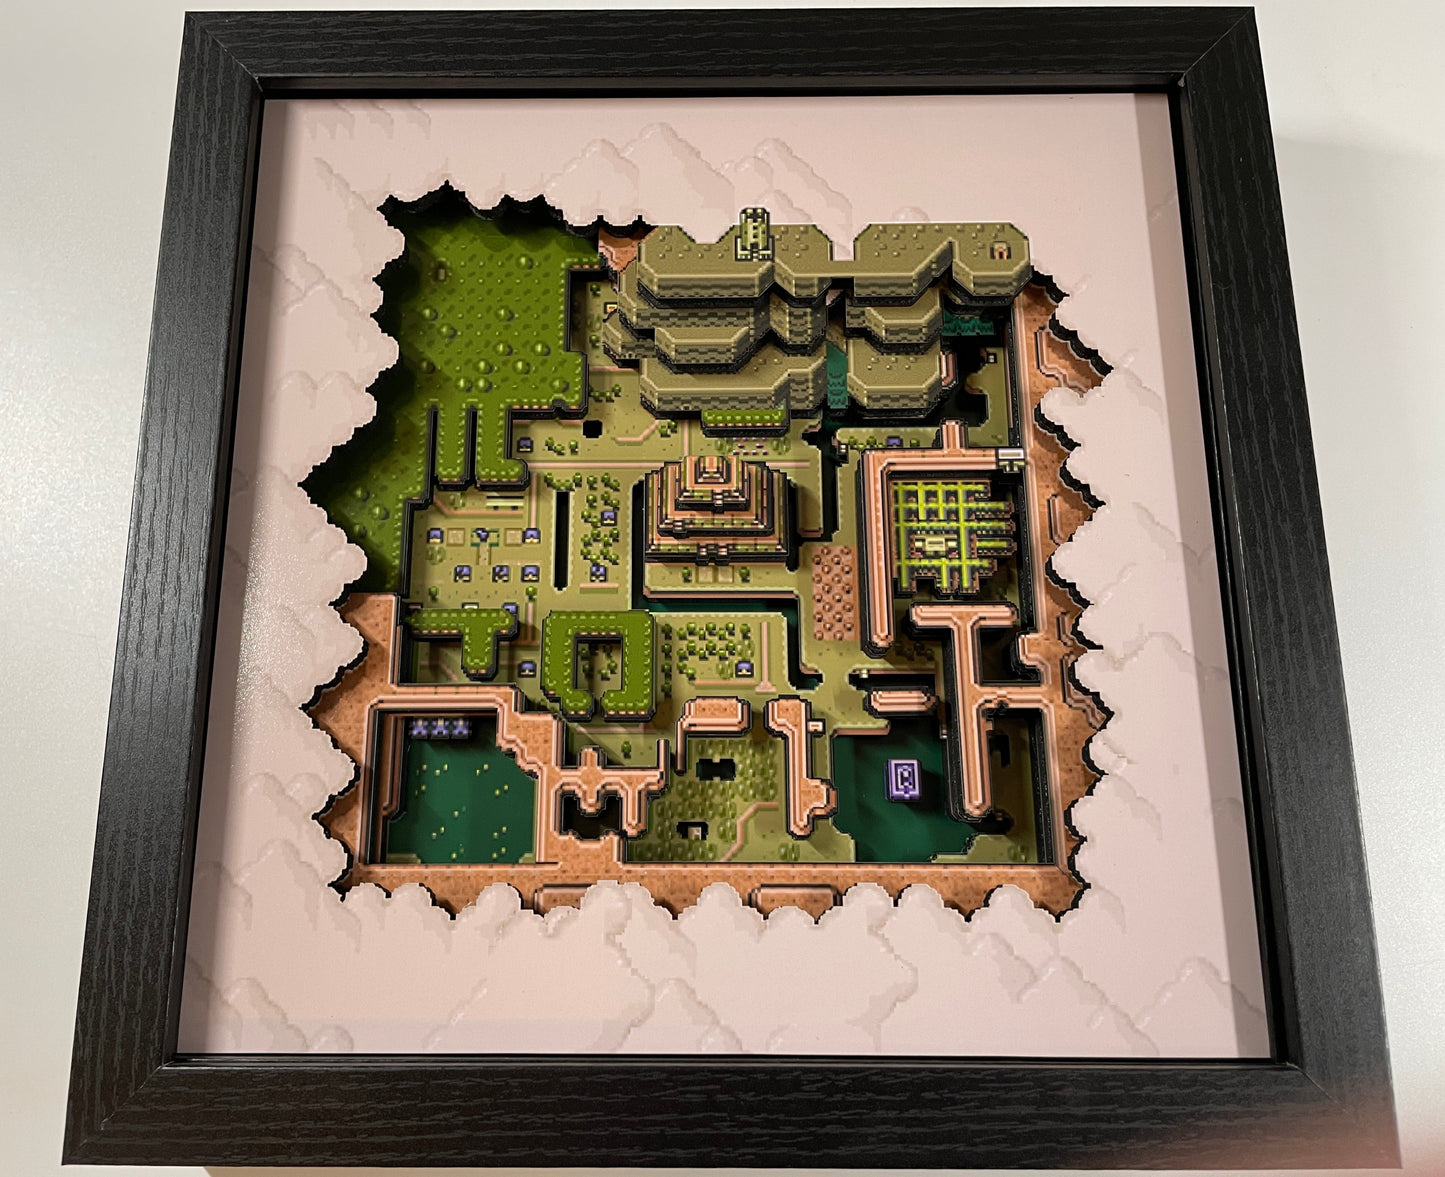 Legend of Zelda: A Link to the Past - Hyrule Map - The Dark World 3D Shadow Box!